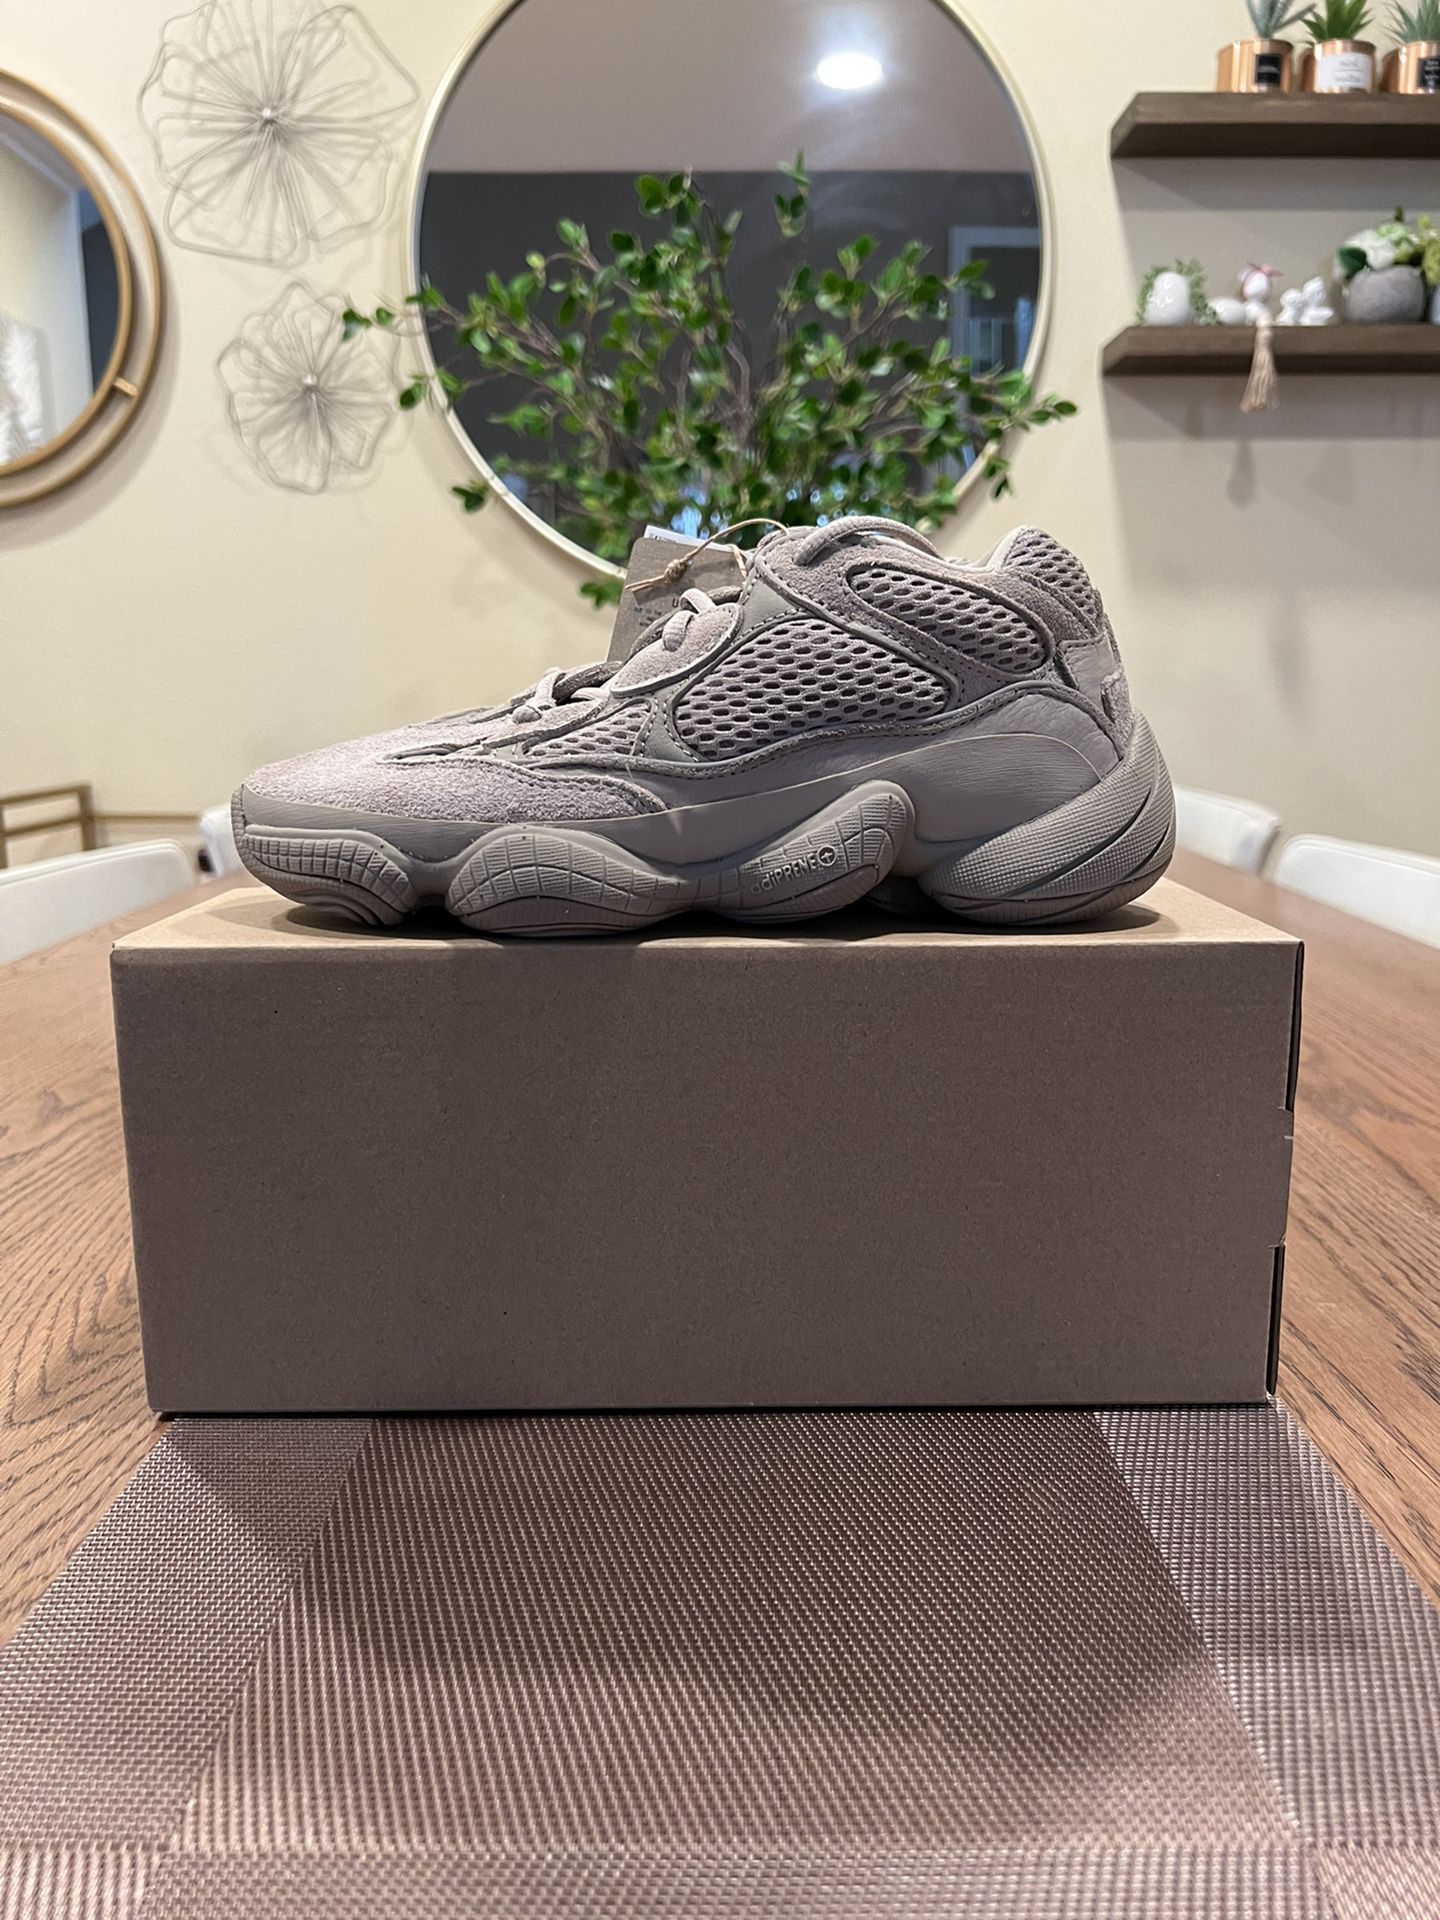 Adidas Yeezy Boost 500 Taupe Light Size 5